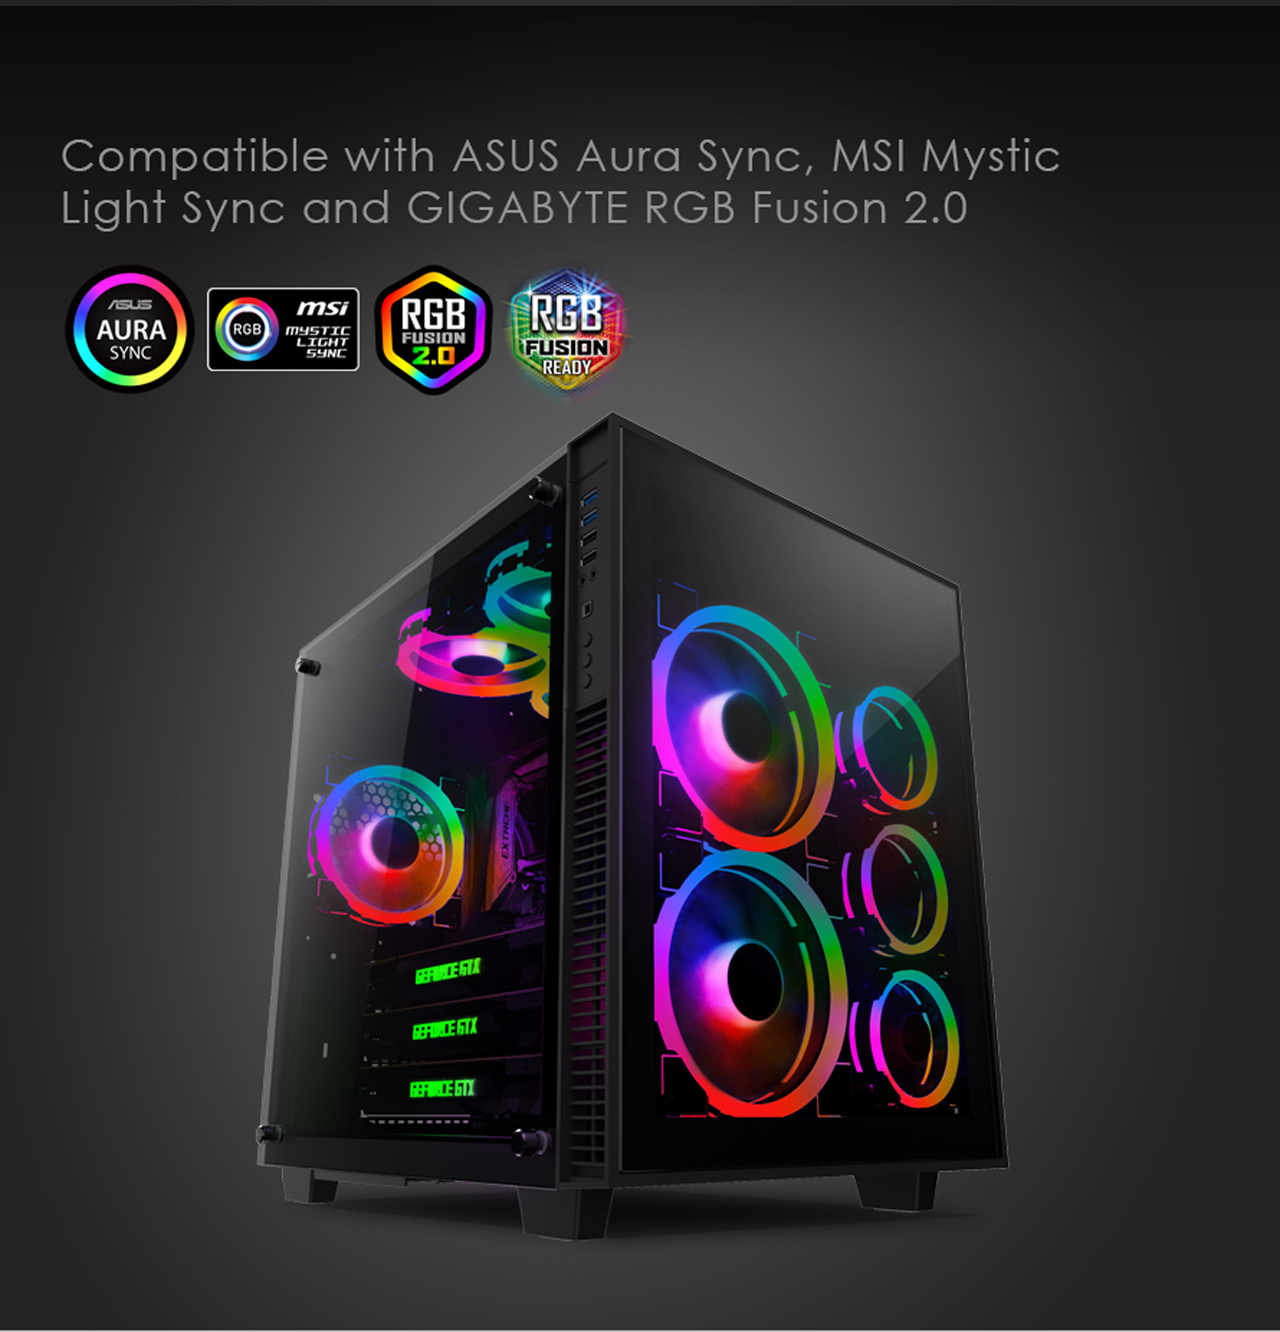 anidees AI Duo 140mm 3pcs RGB PWM Fan Compatible with ASUS Aura SYNC/MSI Mystic/GIGABYTE Fusion MB with 5V 3pins Header, for case Fan, Cooler Fan, with Remote(AI-AR-DUO14) Case Fans -